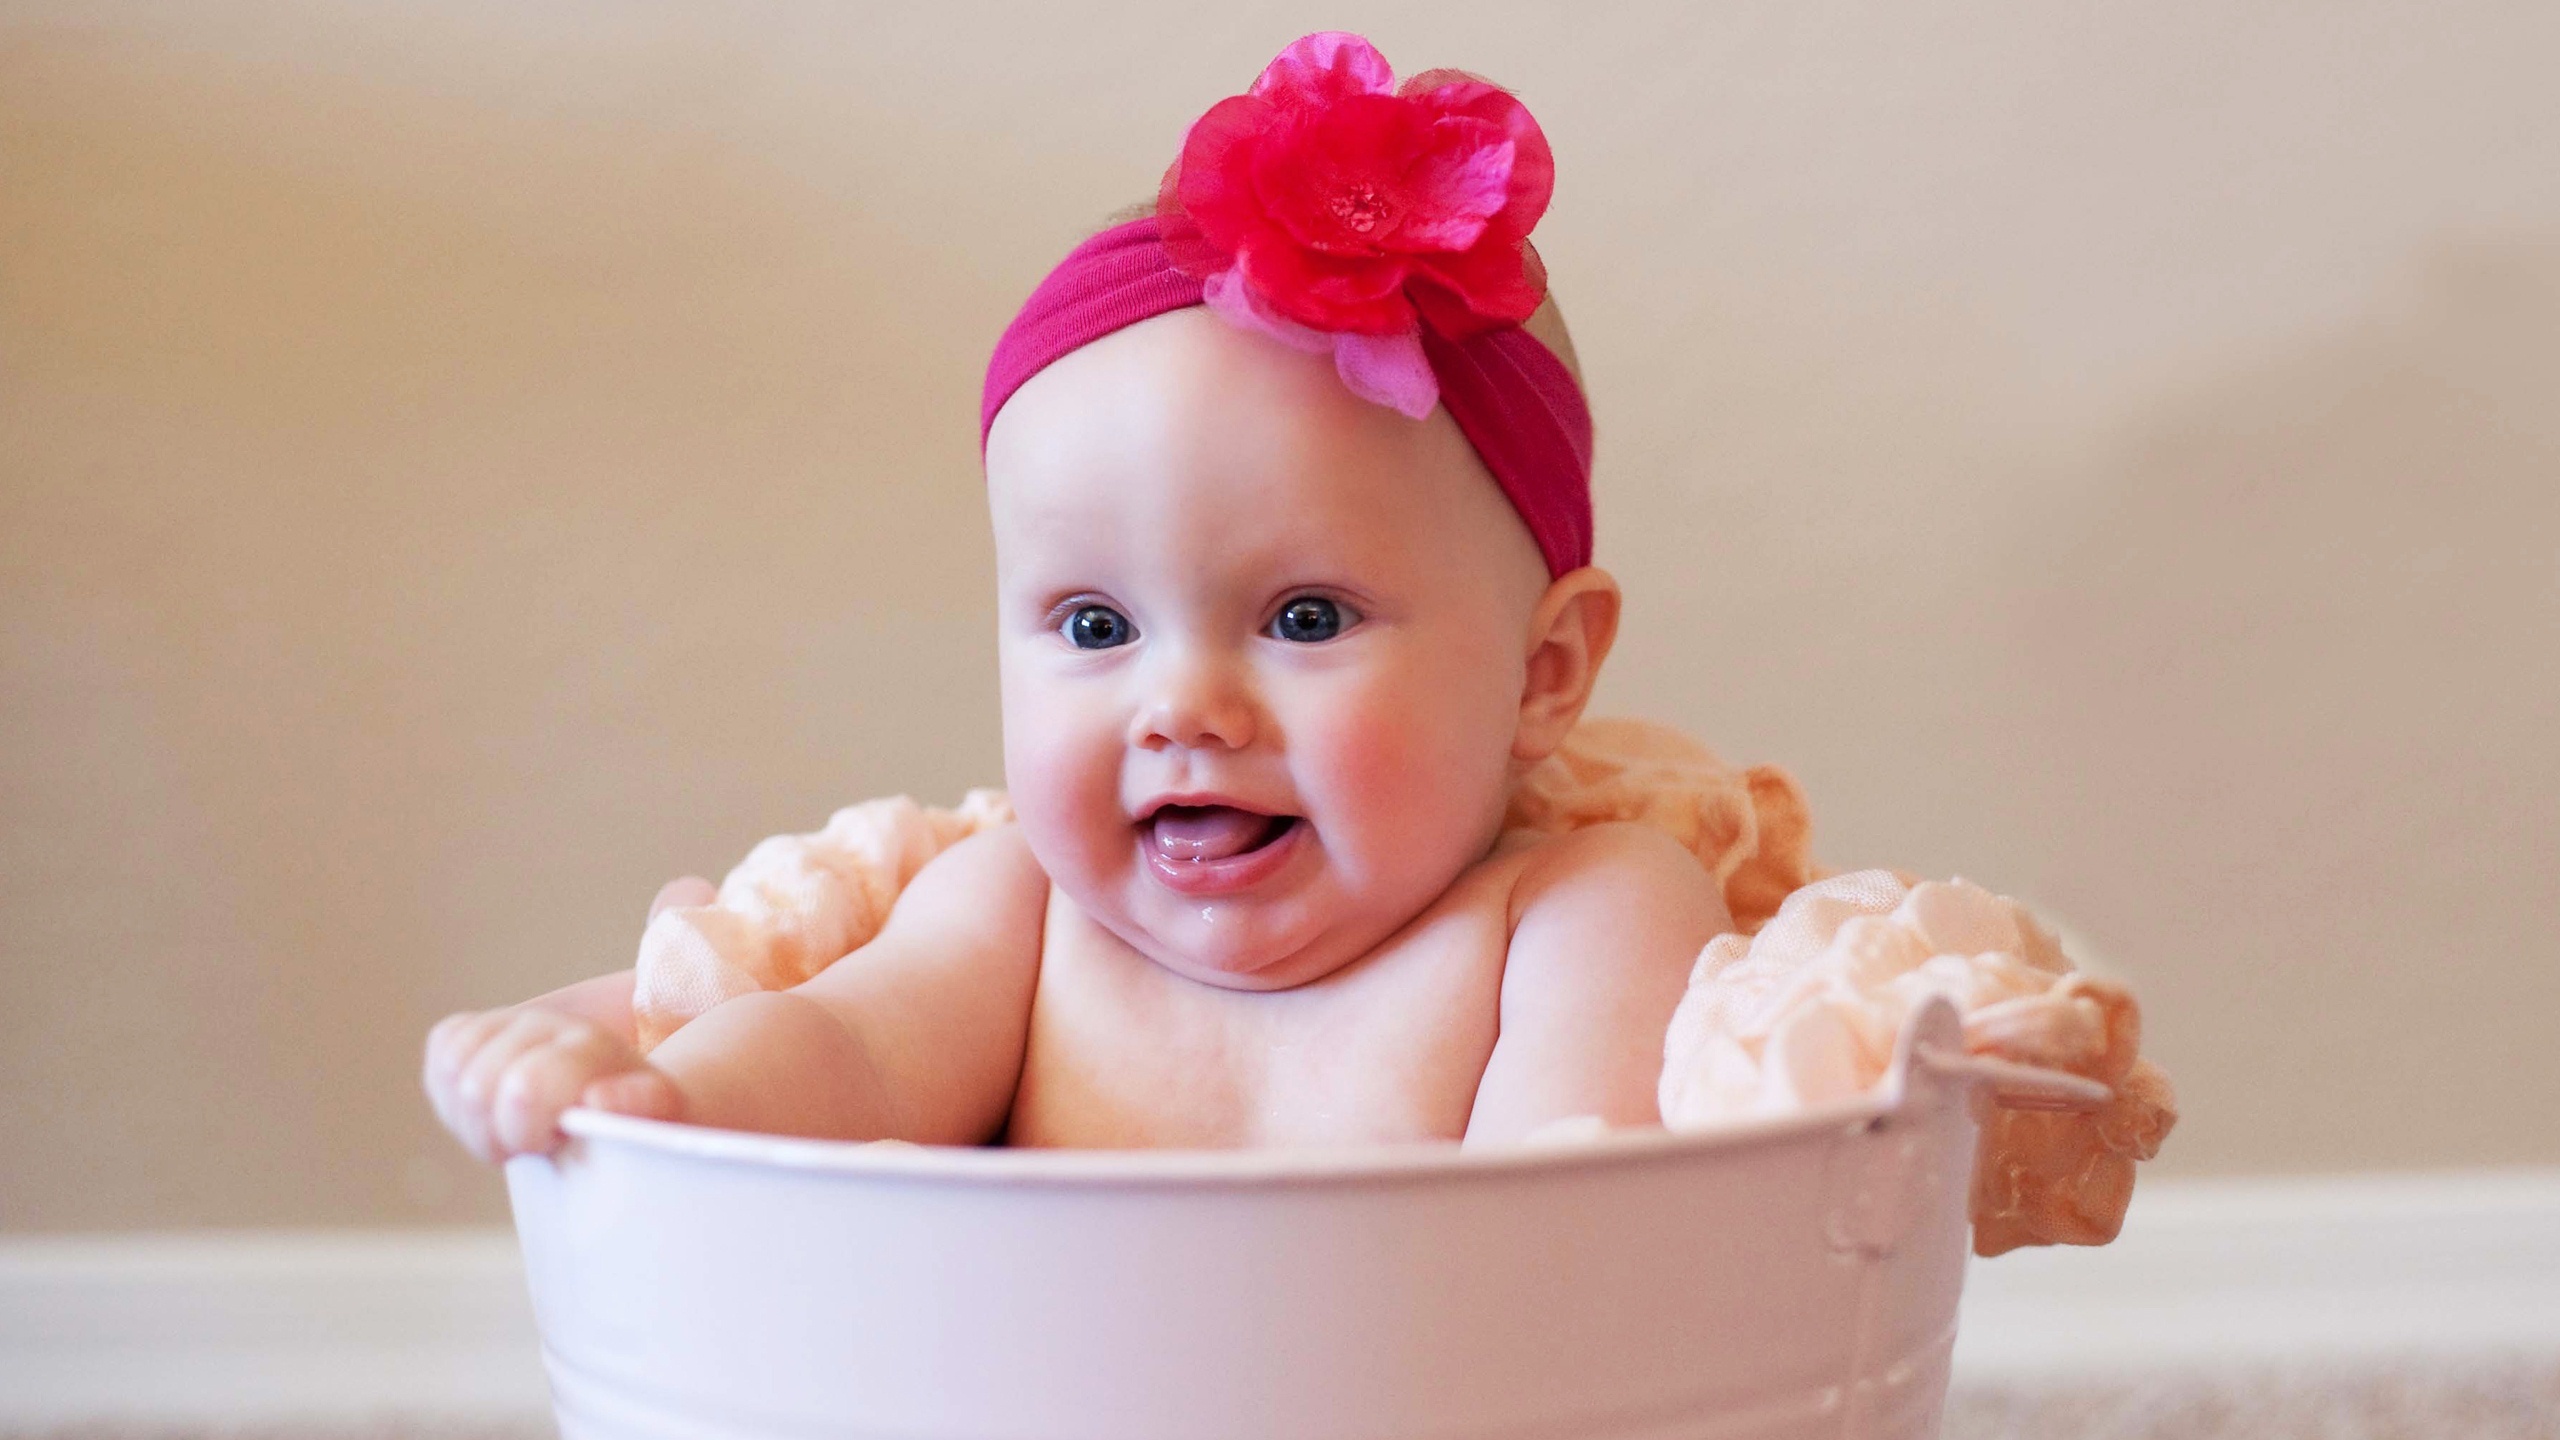 Cutest Baby Girl Wallpapers - Baby Images Hd Download Free - HD Wallpaper 